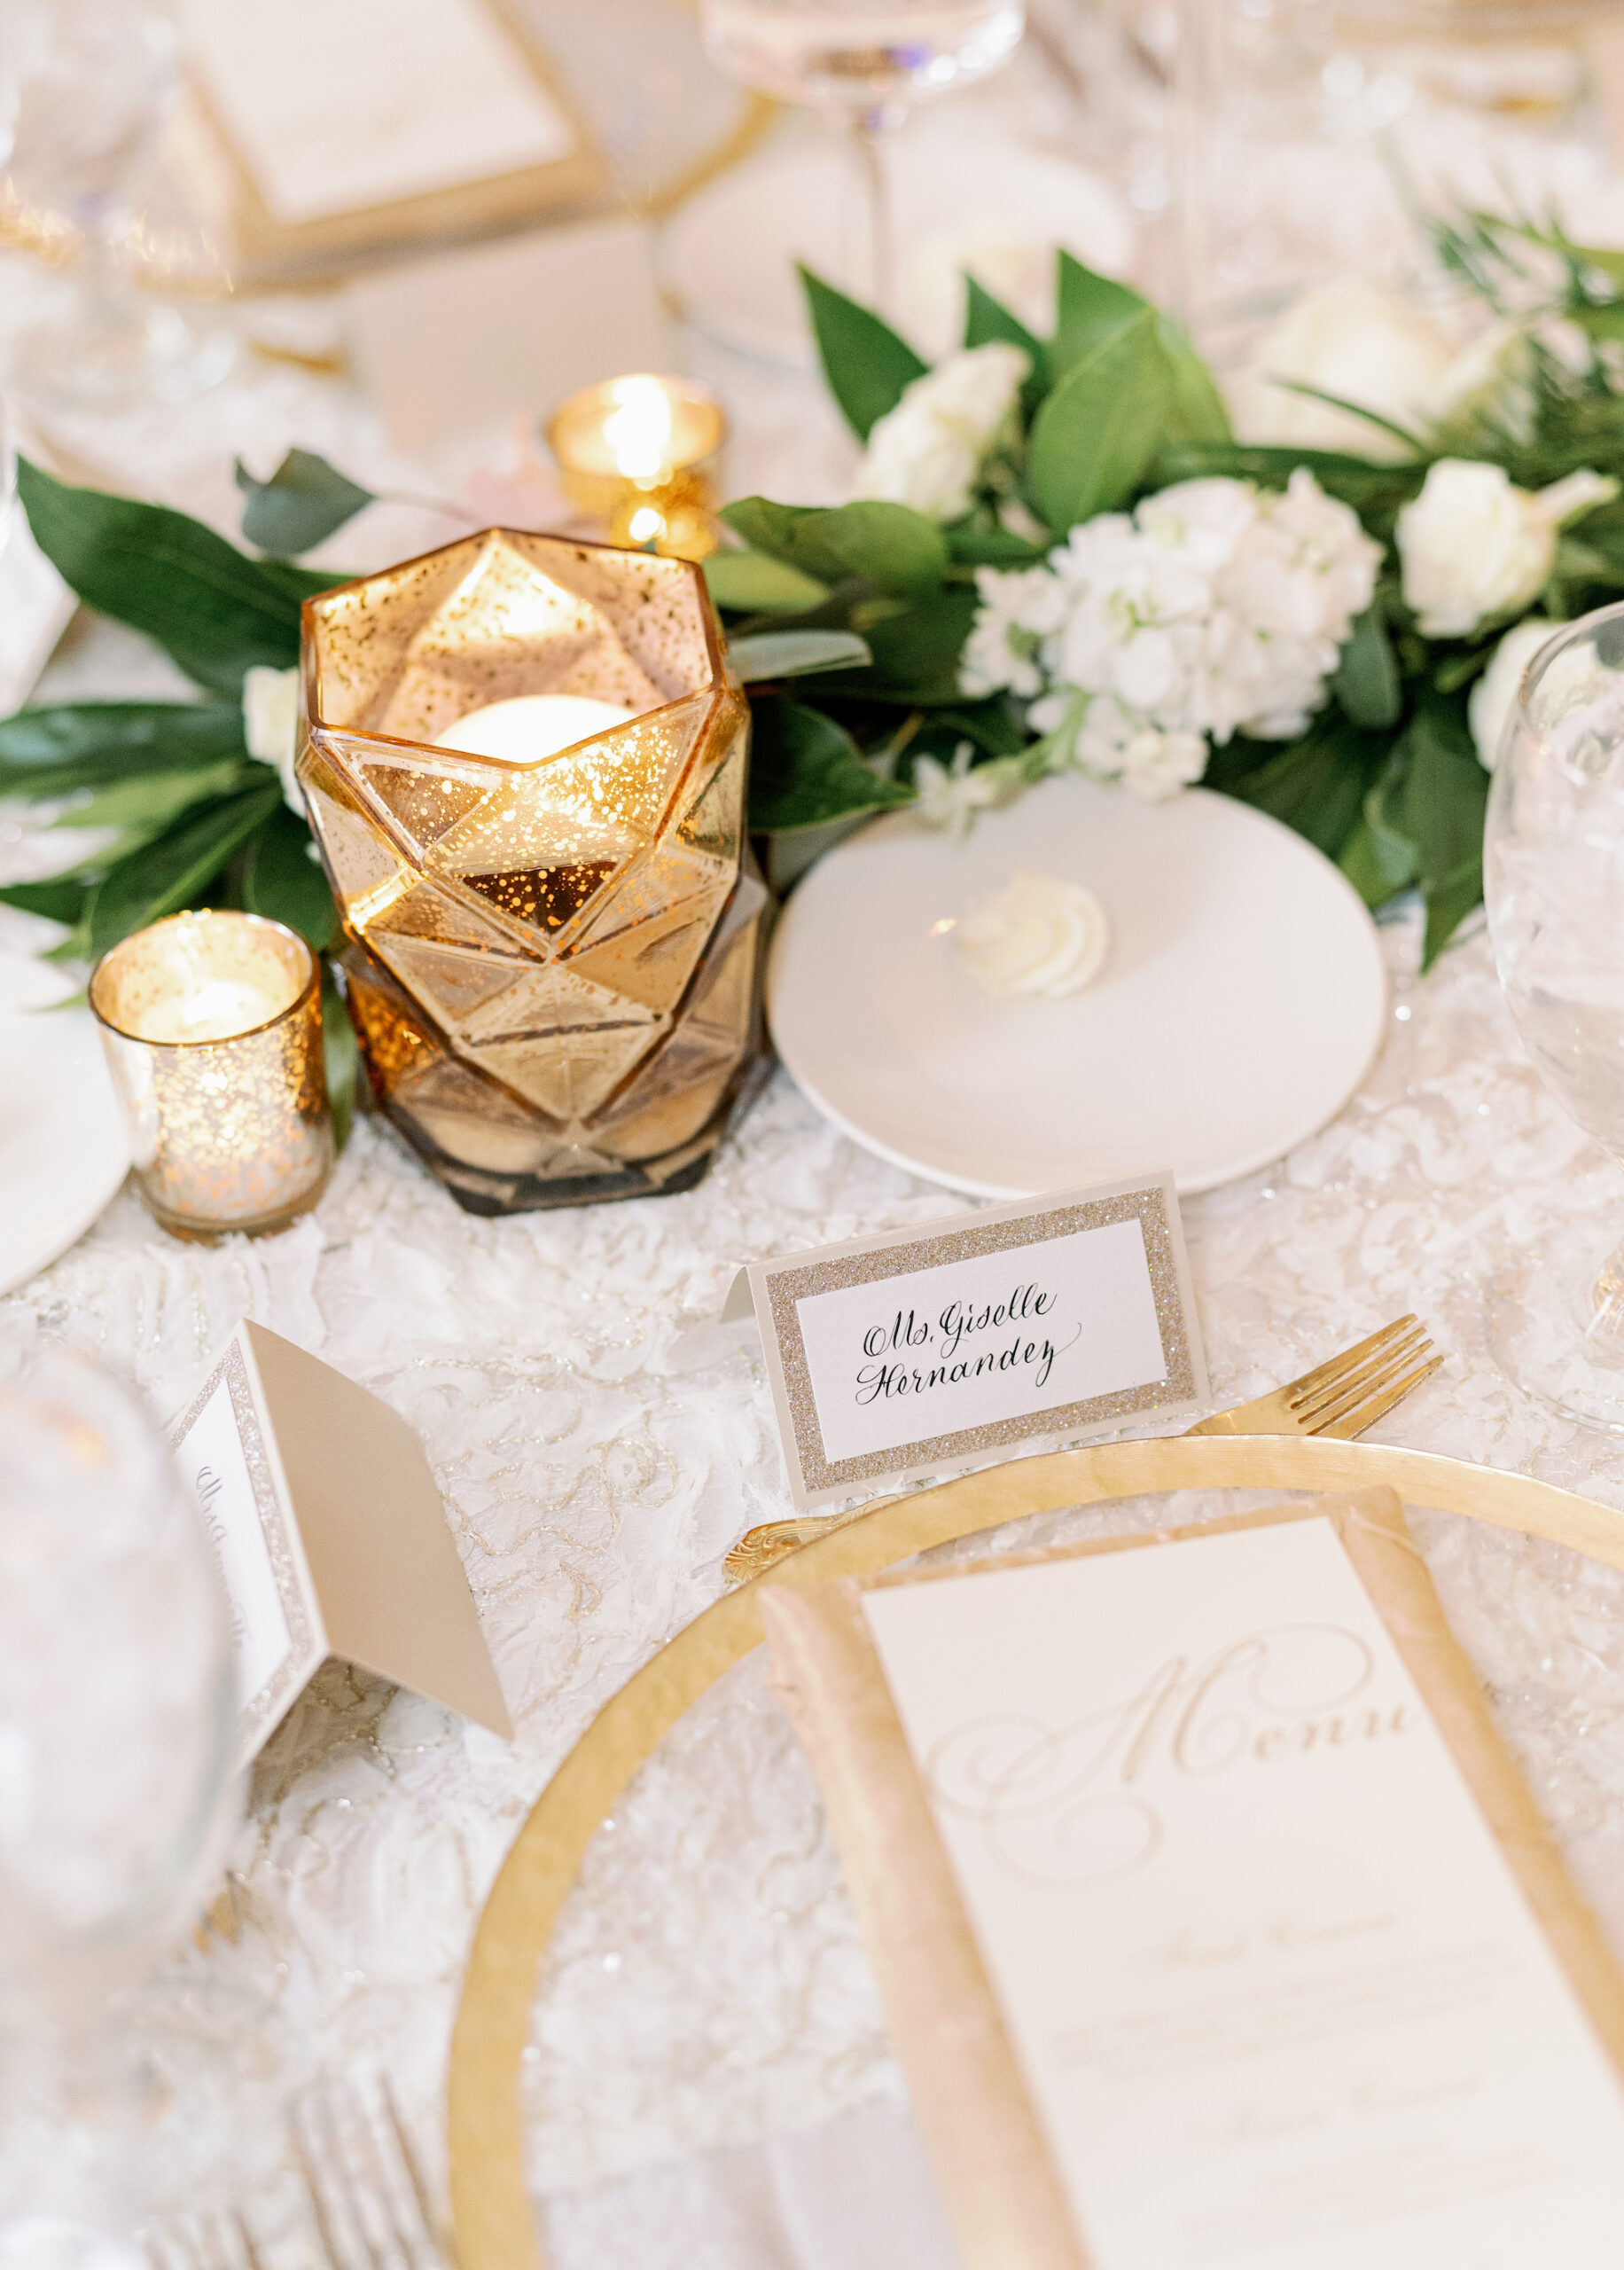 Lace Table Linen with Gold Mercury Candlelit Wedding Reception Table Decor | White Hydrangea and Ruscus Greenery Centerpiece Ideas | Gold Flatware and Chargers | Tampa Bay Rentals A Chair Affair | Kate Ryan Event Rentals | Over The Top Rental Linens